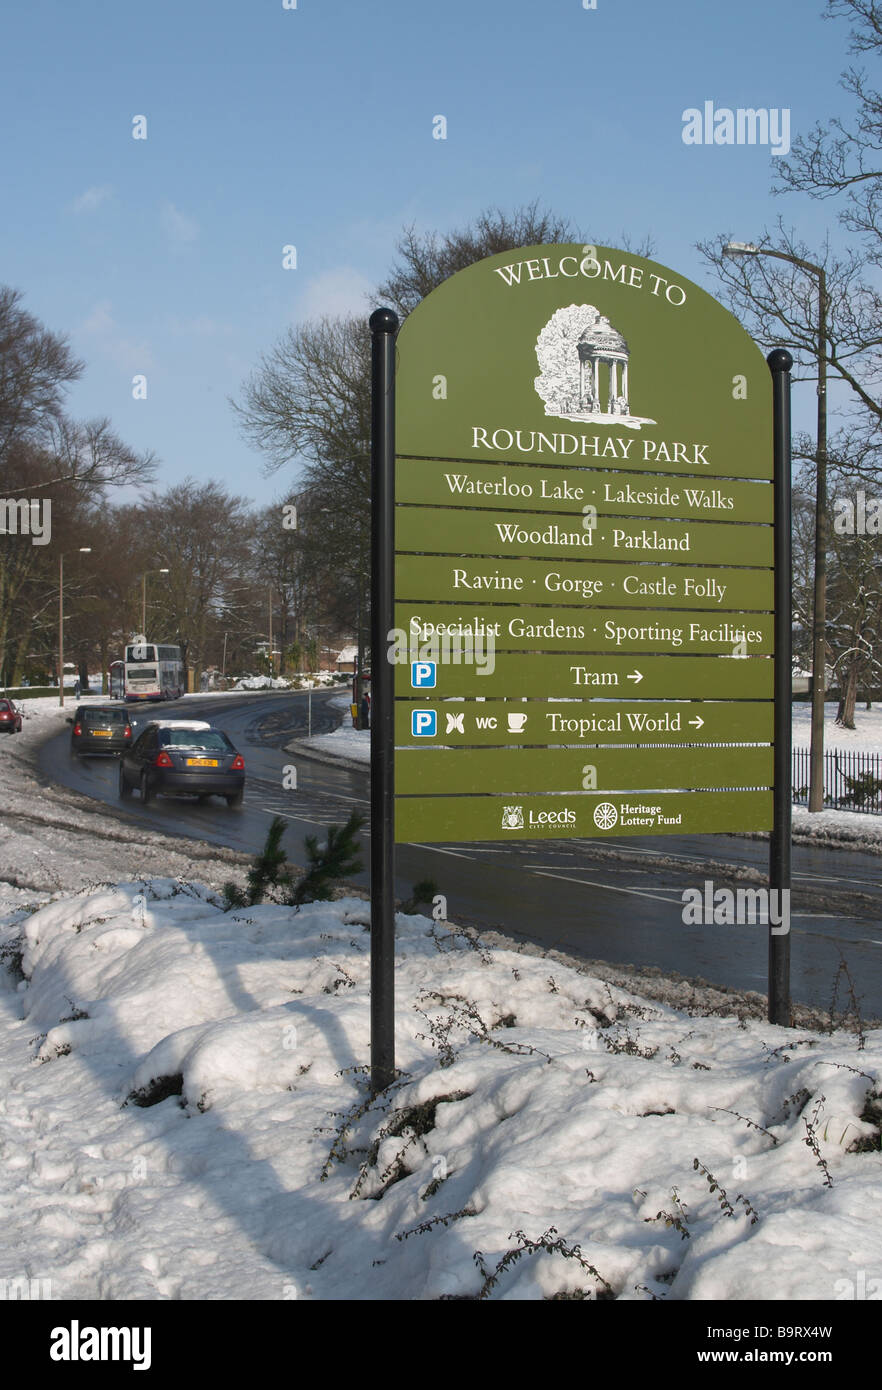 Snow scene with trees and shrubs and hedge Road running through with Welcome to Roundhay Park sign Stock Photo